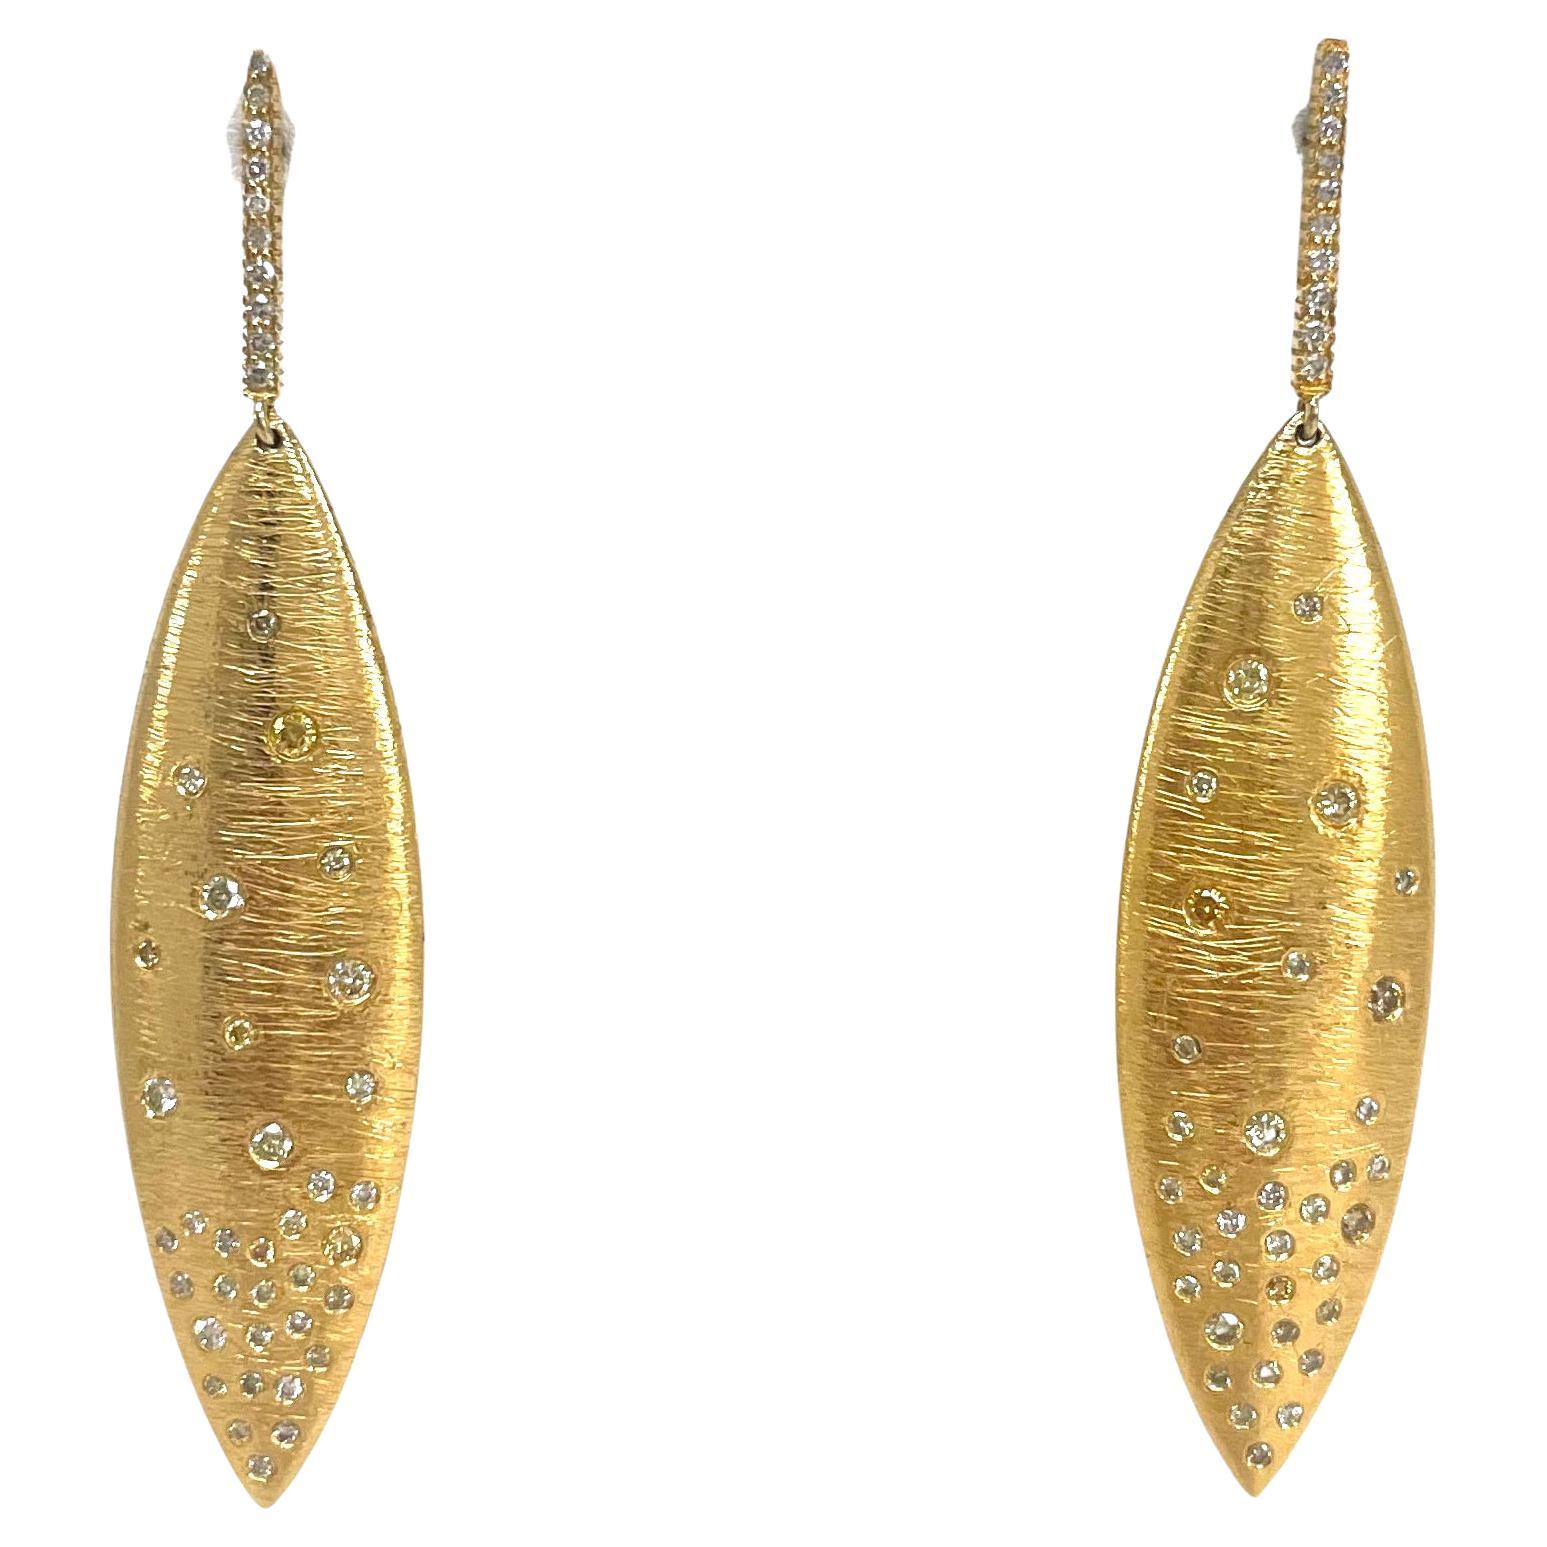 Gold Textured Earrings with Diamond Clusters For Sale 2